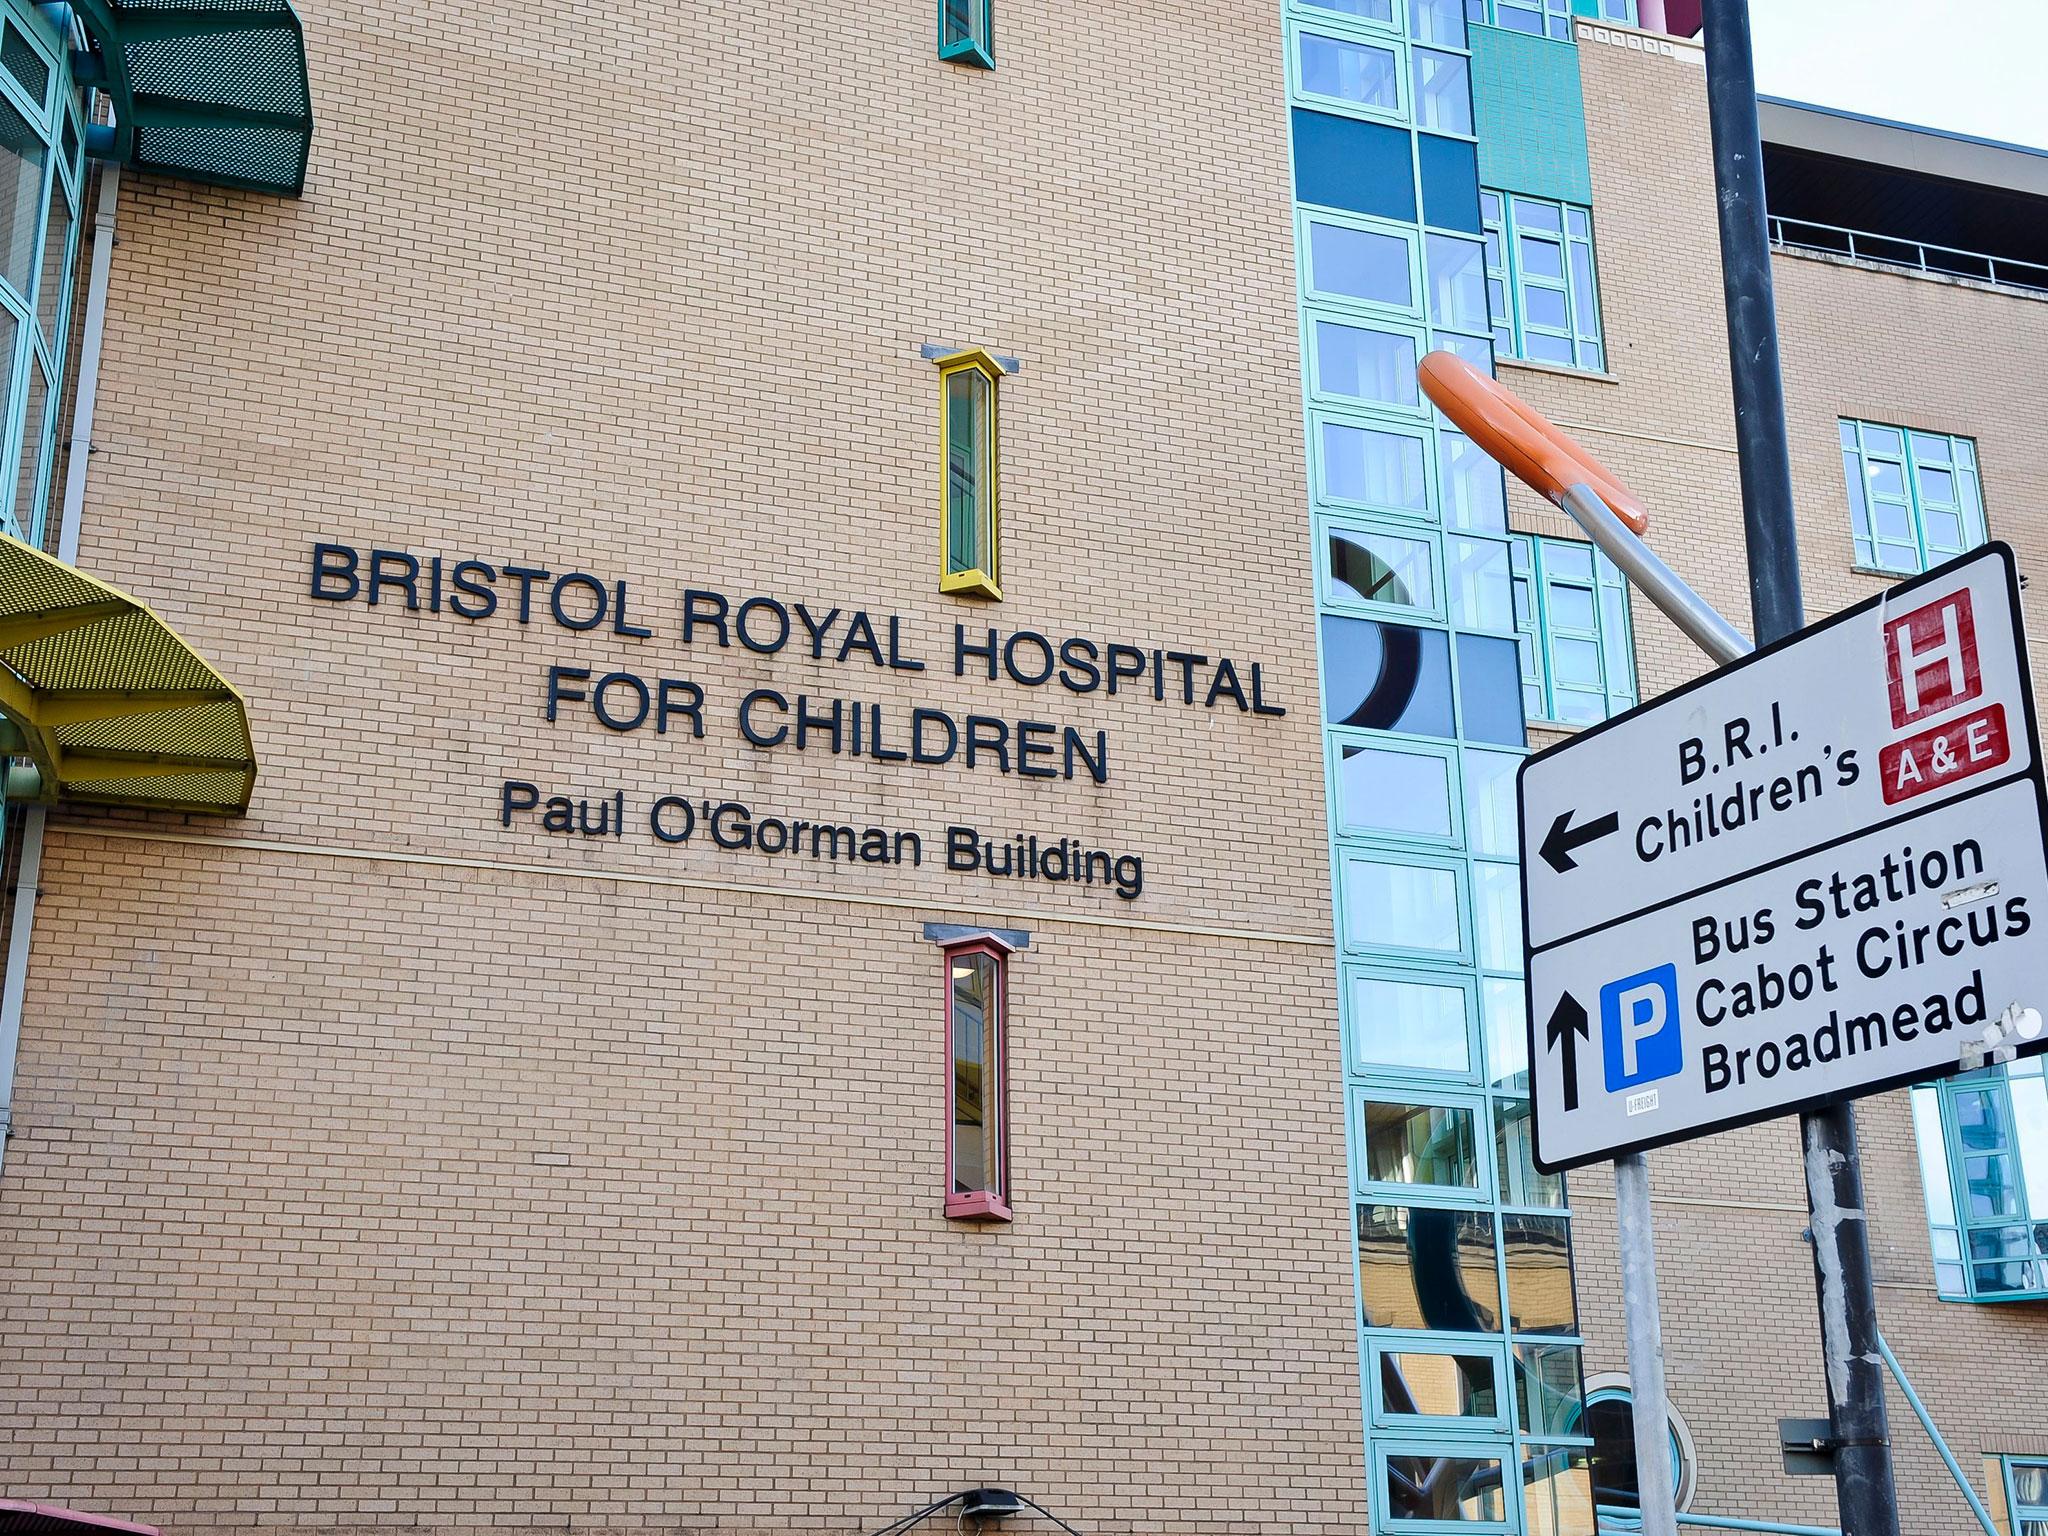 Parents were 'let down' by Bristol Royal Hospital for Children's cardiac ward on numerous occasions but there is no evidence to suggest failings in care and treatment on the scale of a previous inquiry, an independent review has found